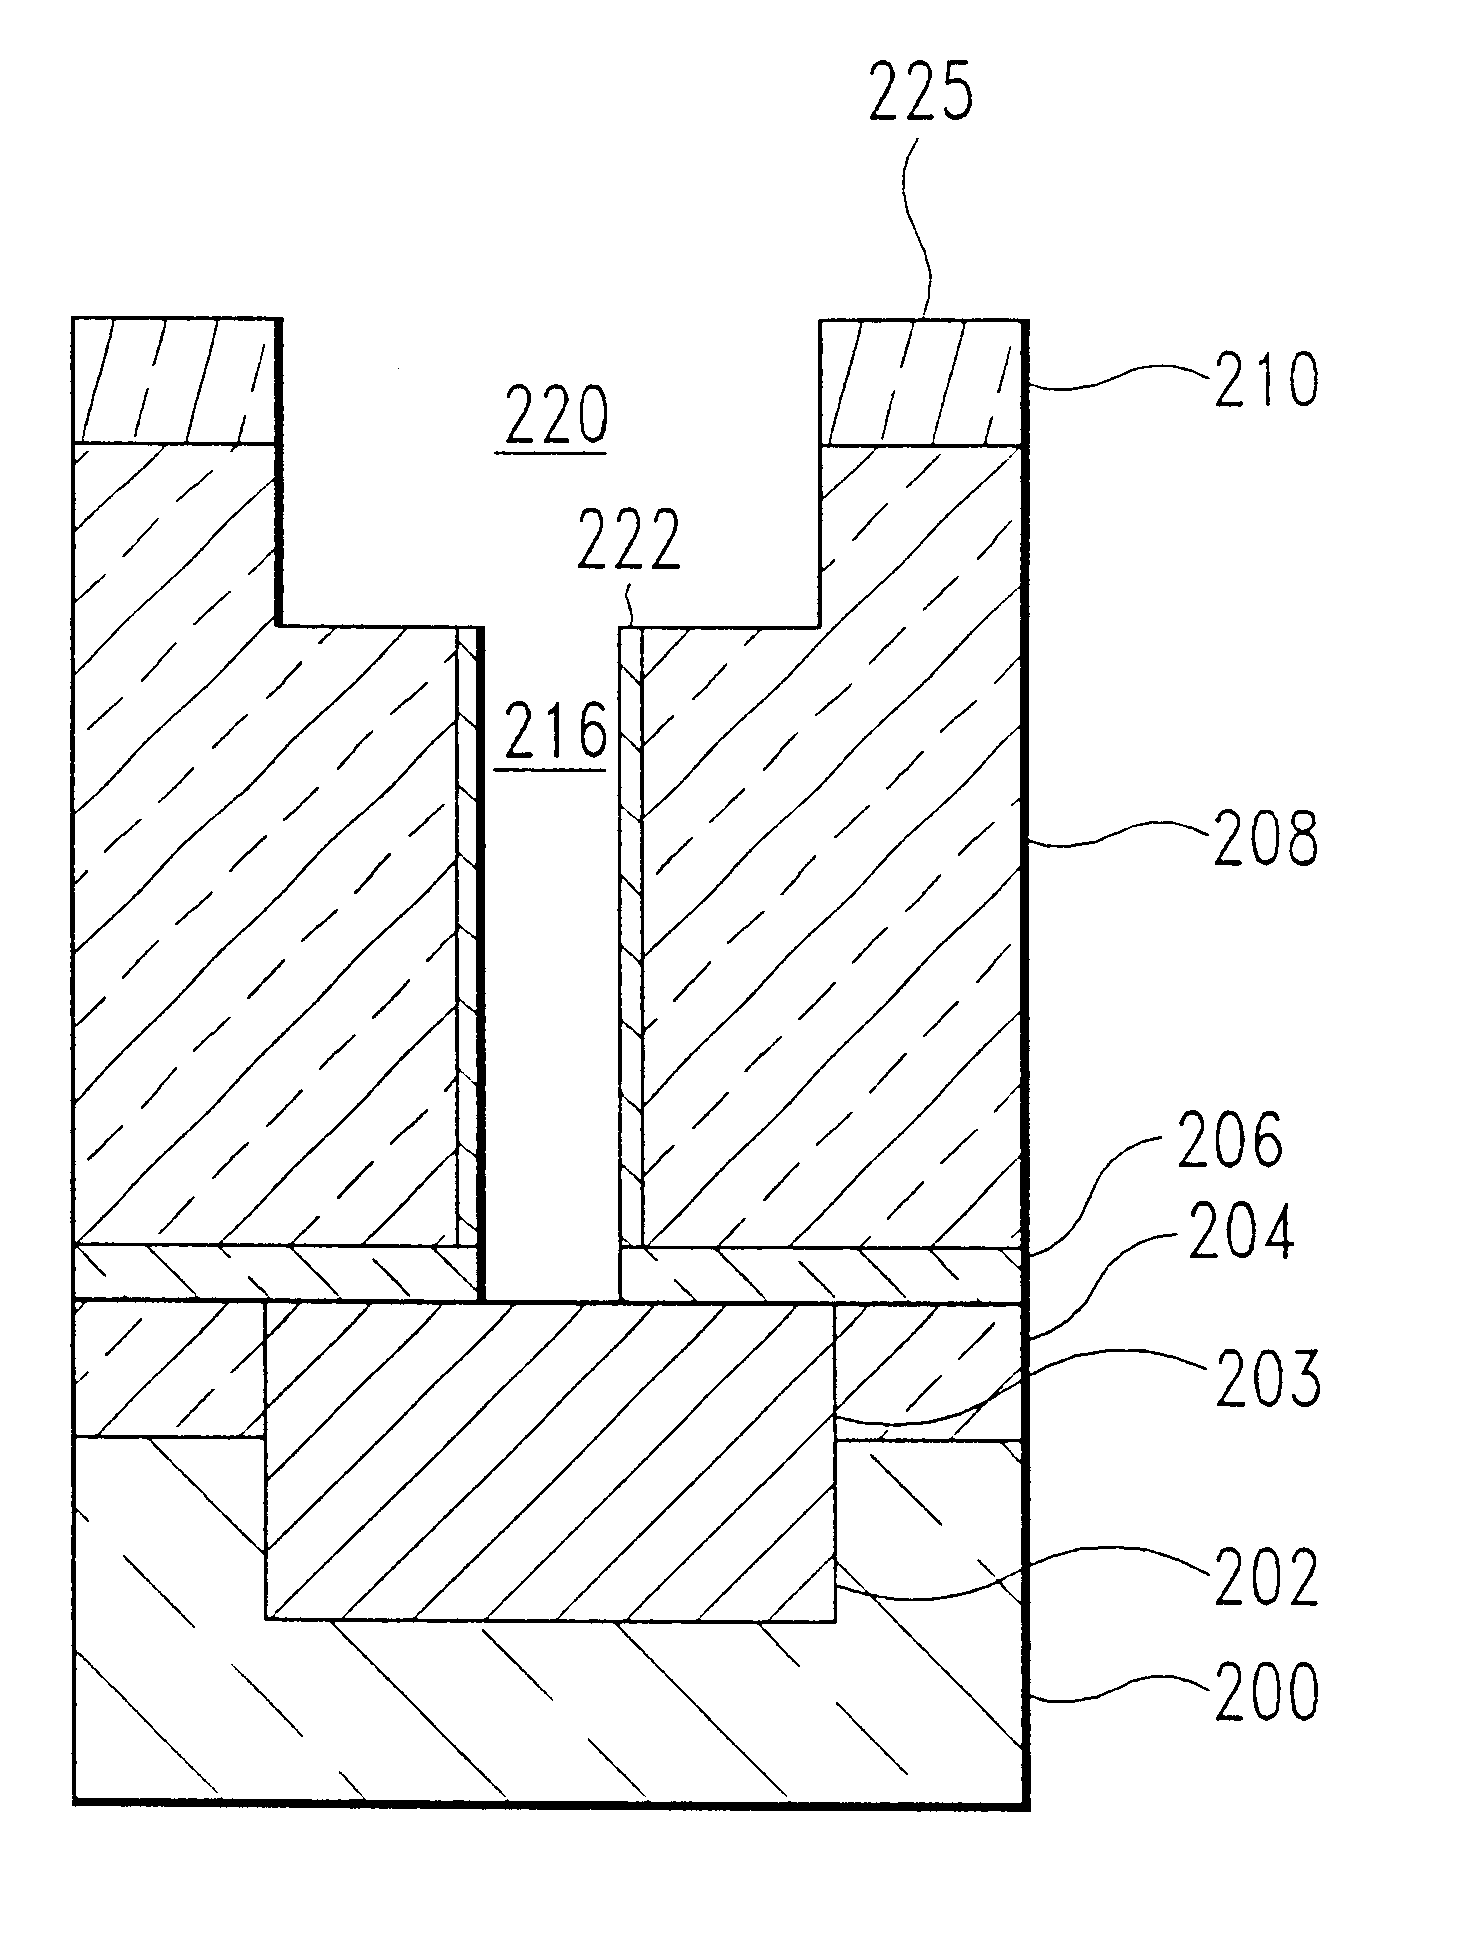 Method of reducing plasma charging damage during dielectric etch process for dual damascene interconnect structures